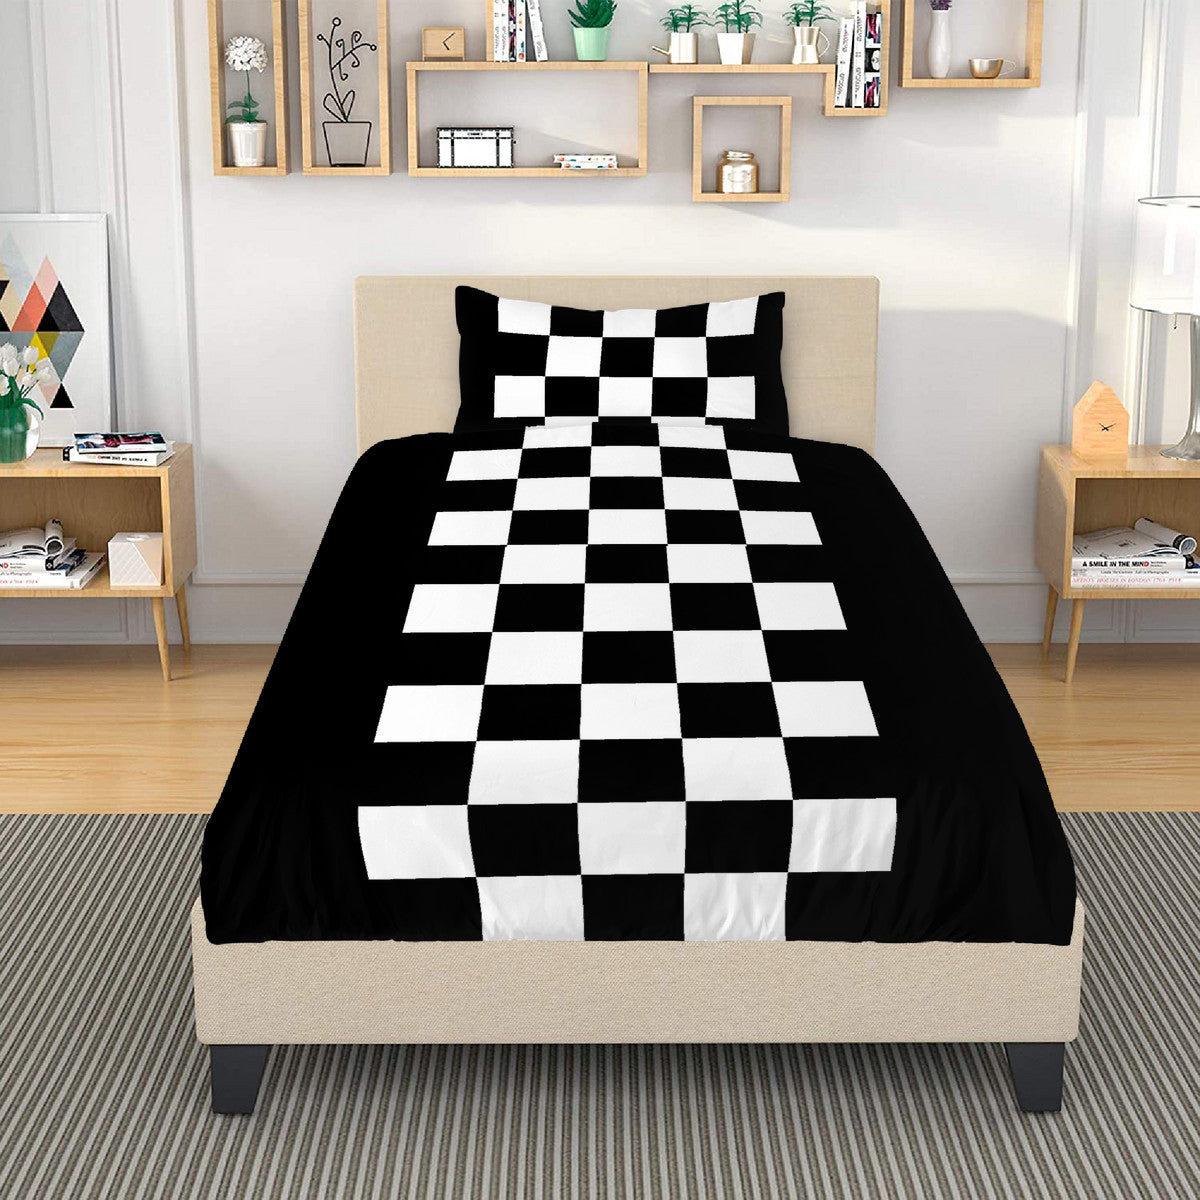 Black with black and white Bedding, Modern bedding decoration Home-clothes-jewelry